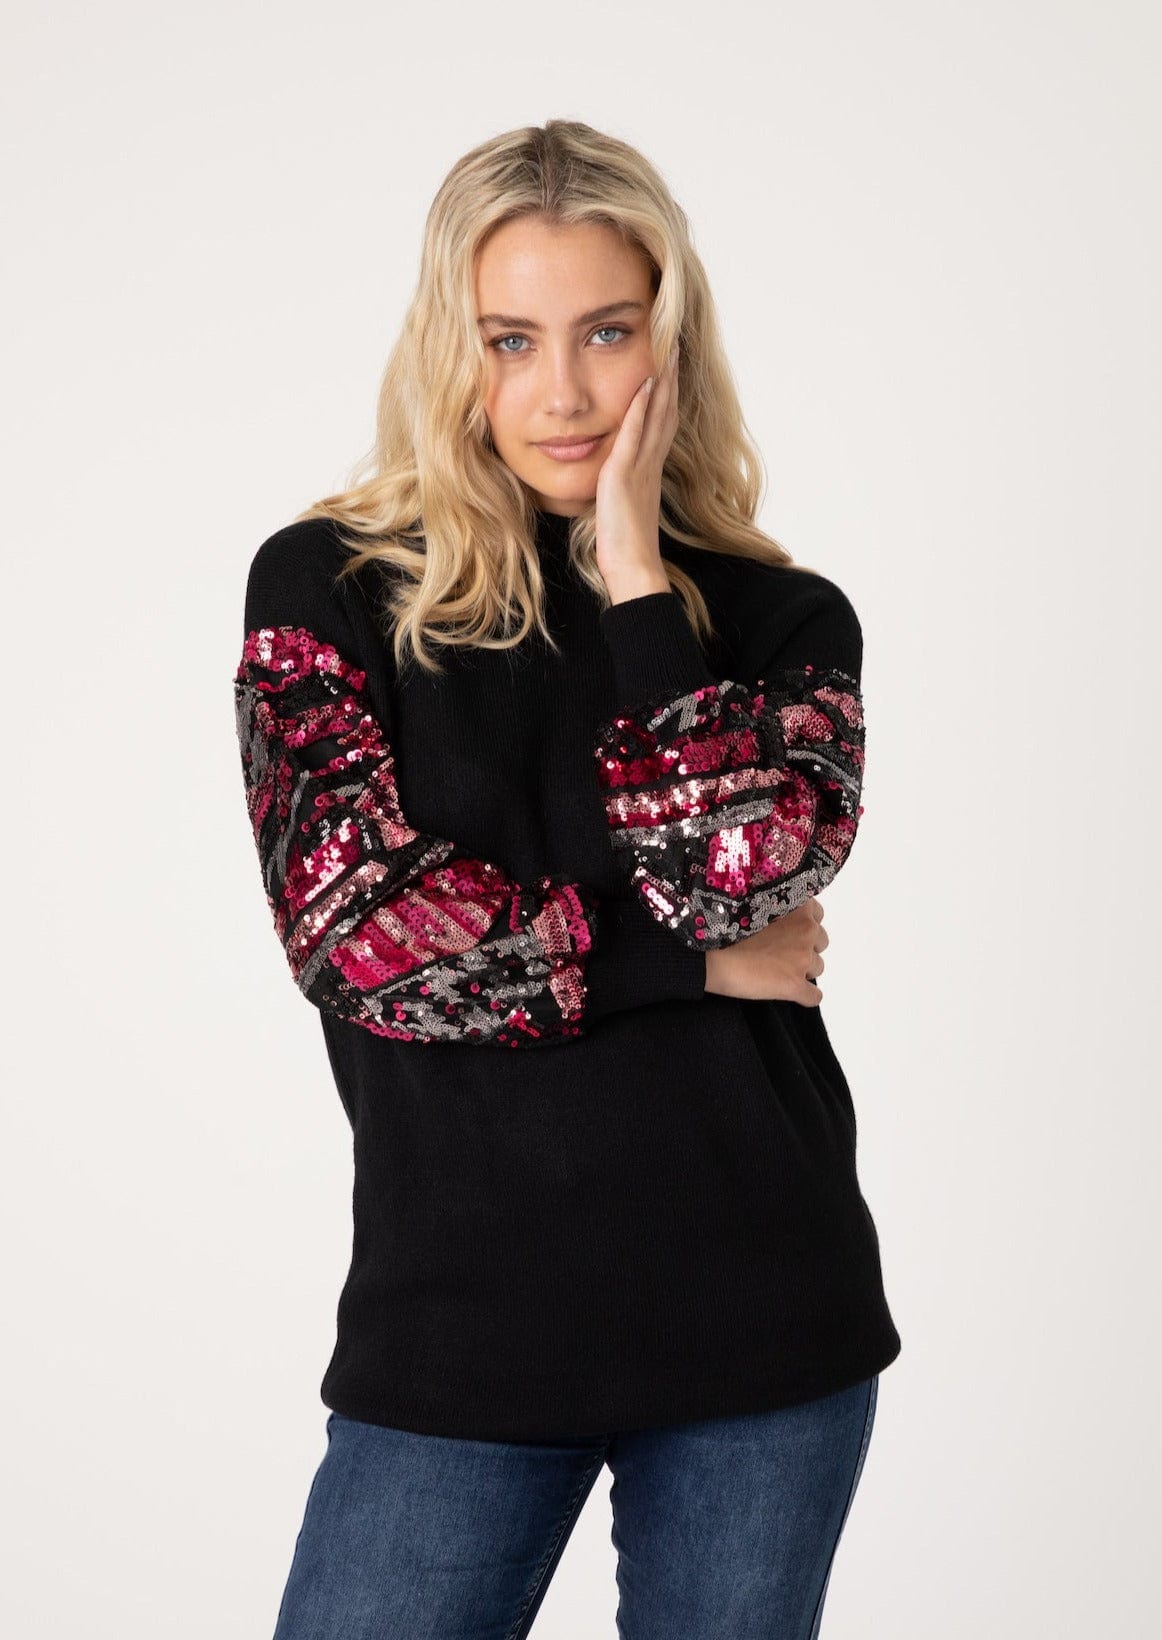 Knitted Round Neck Jersey with Embellished Sleeves In Black - Tribute StoreTRIBUTE